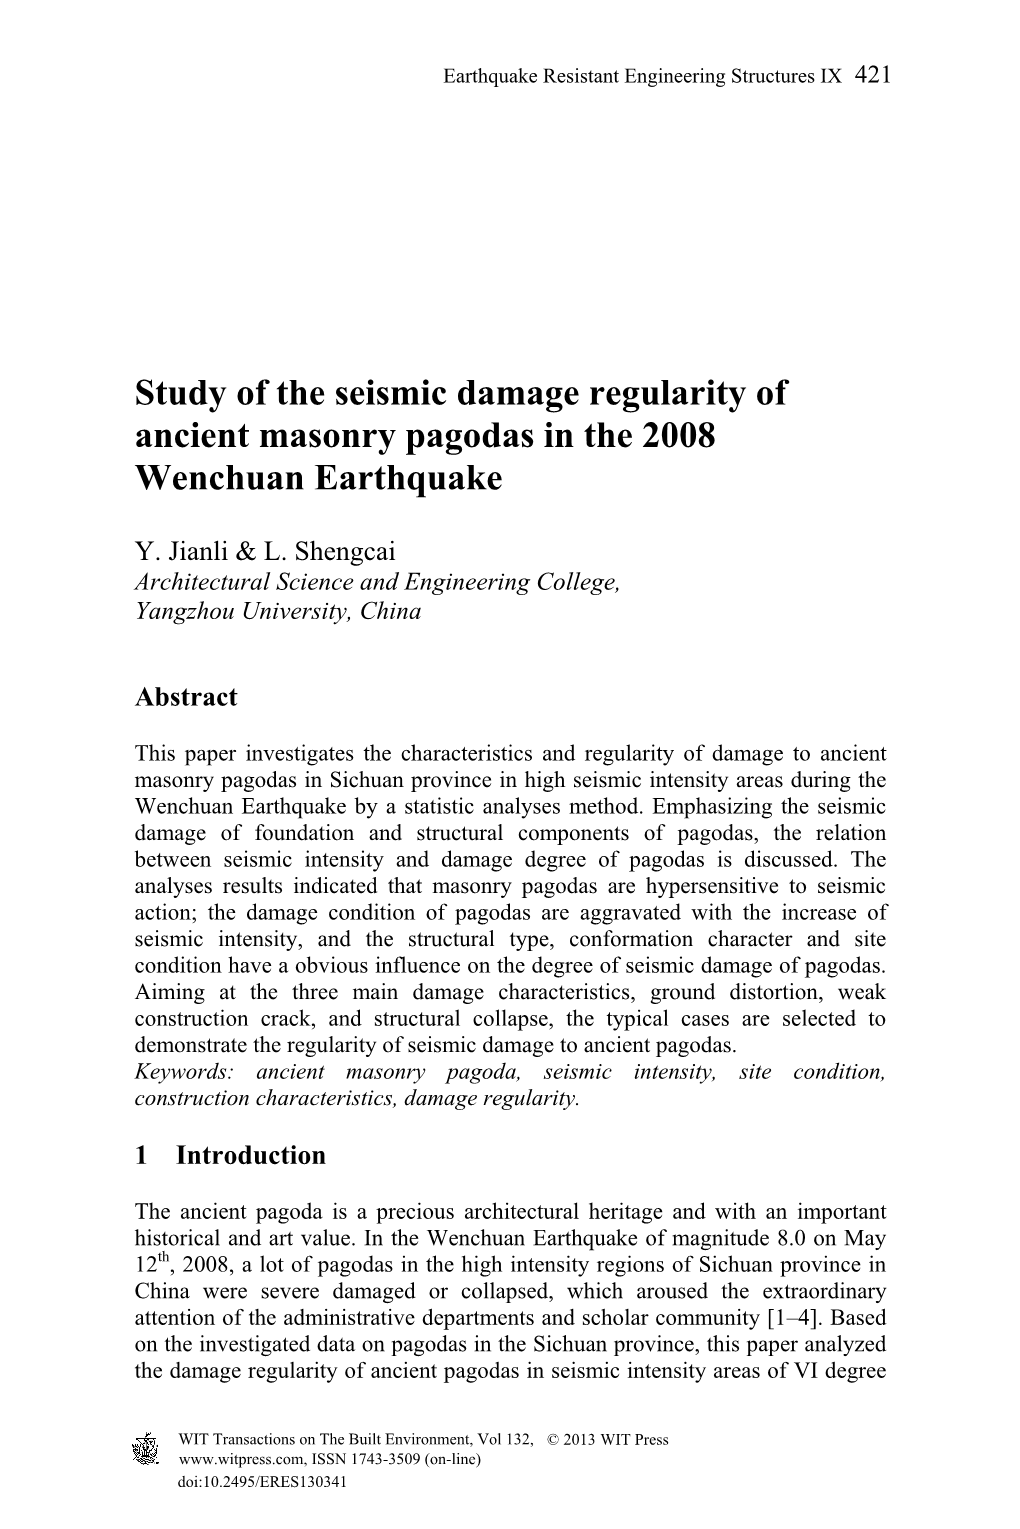 Study of the Seismic Damage Regularity of Ancient Masonry Pagodas in the 2008 Wenchuan Earthquake